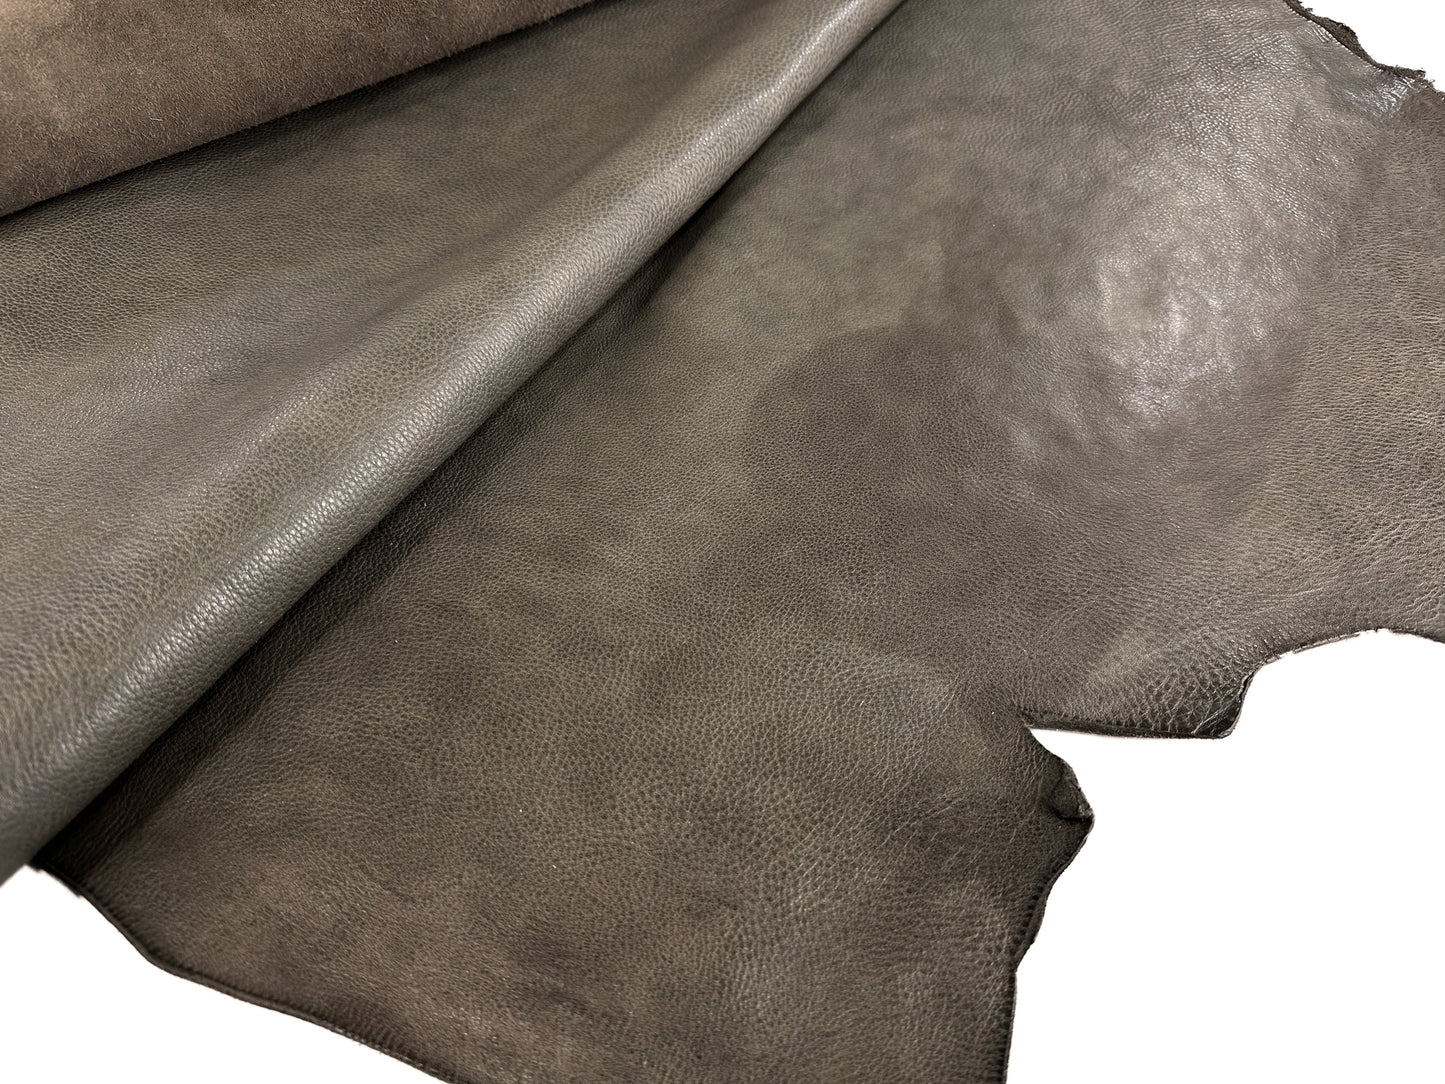 MW Natural Tanned Shrink Leather #7 Gray